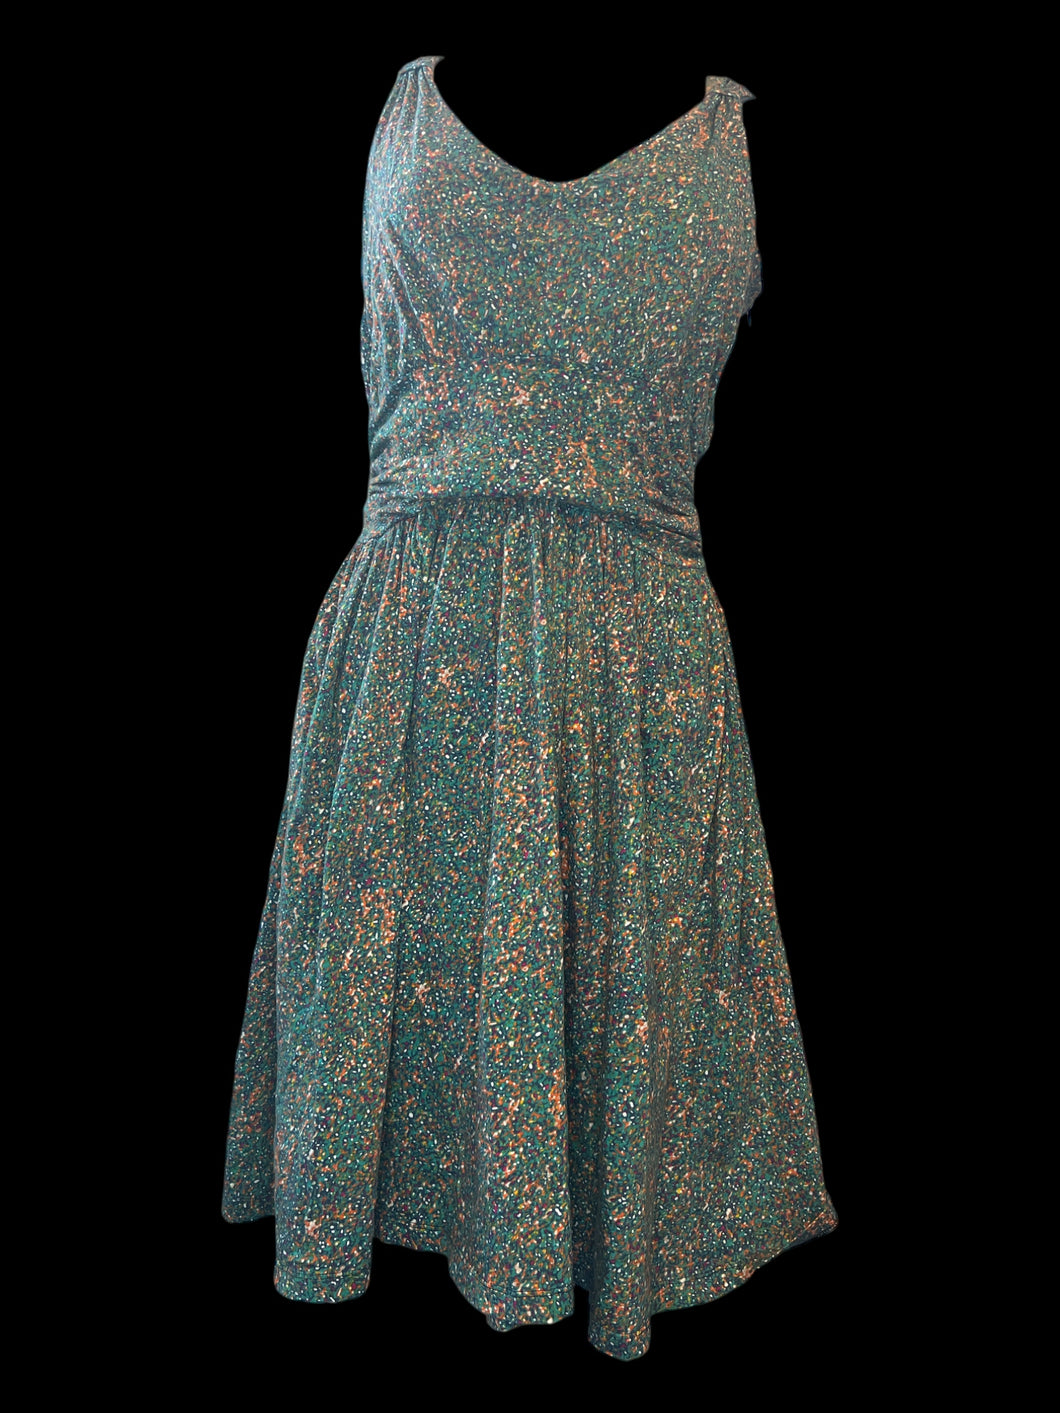 L Teal & multicolor abstract pattern sleeveless dress w/ v neckline, ruched details, a-line skirt, & side zipper/clasp closure